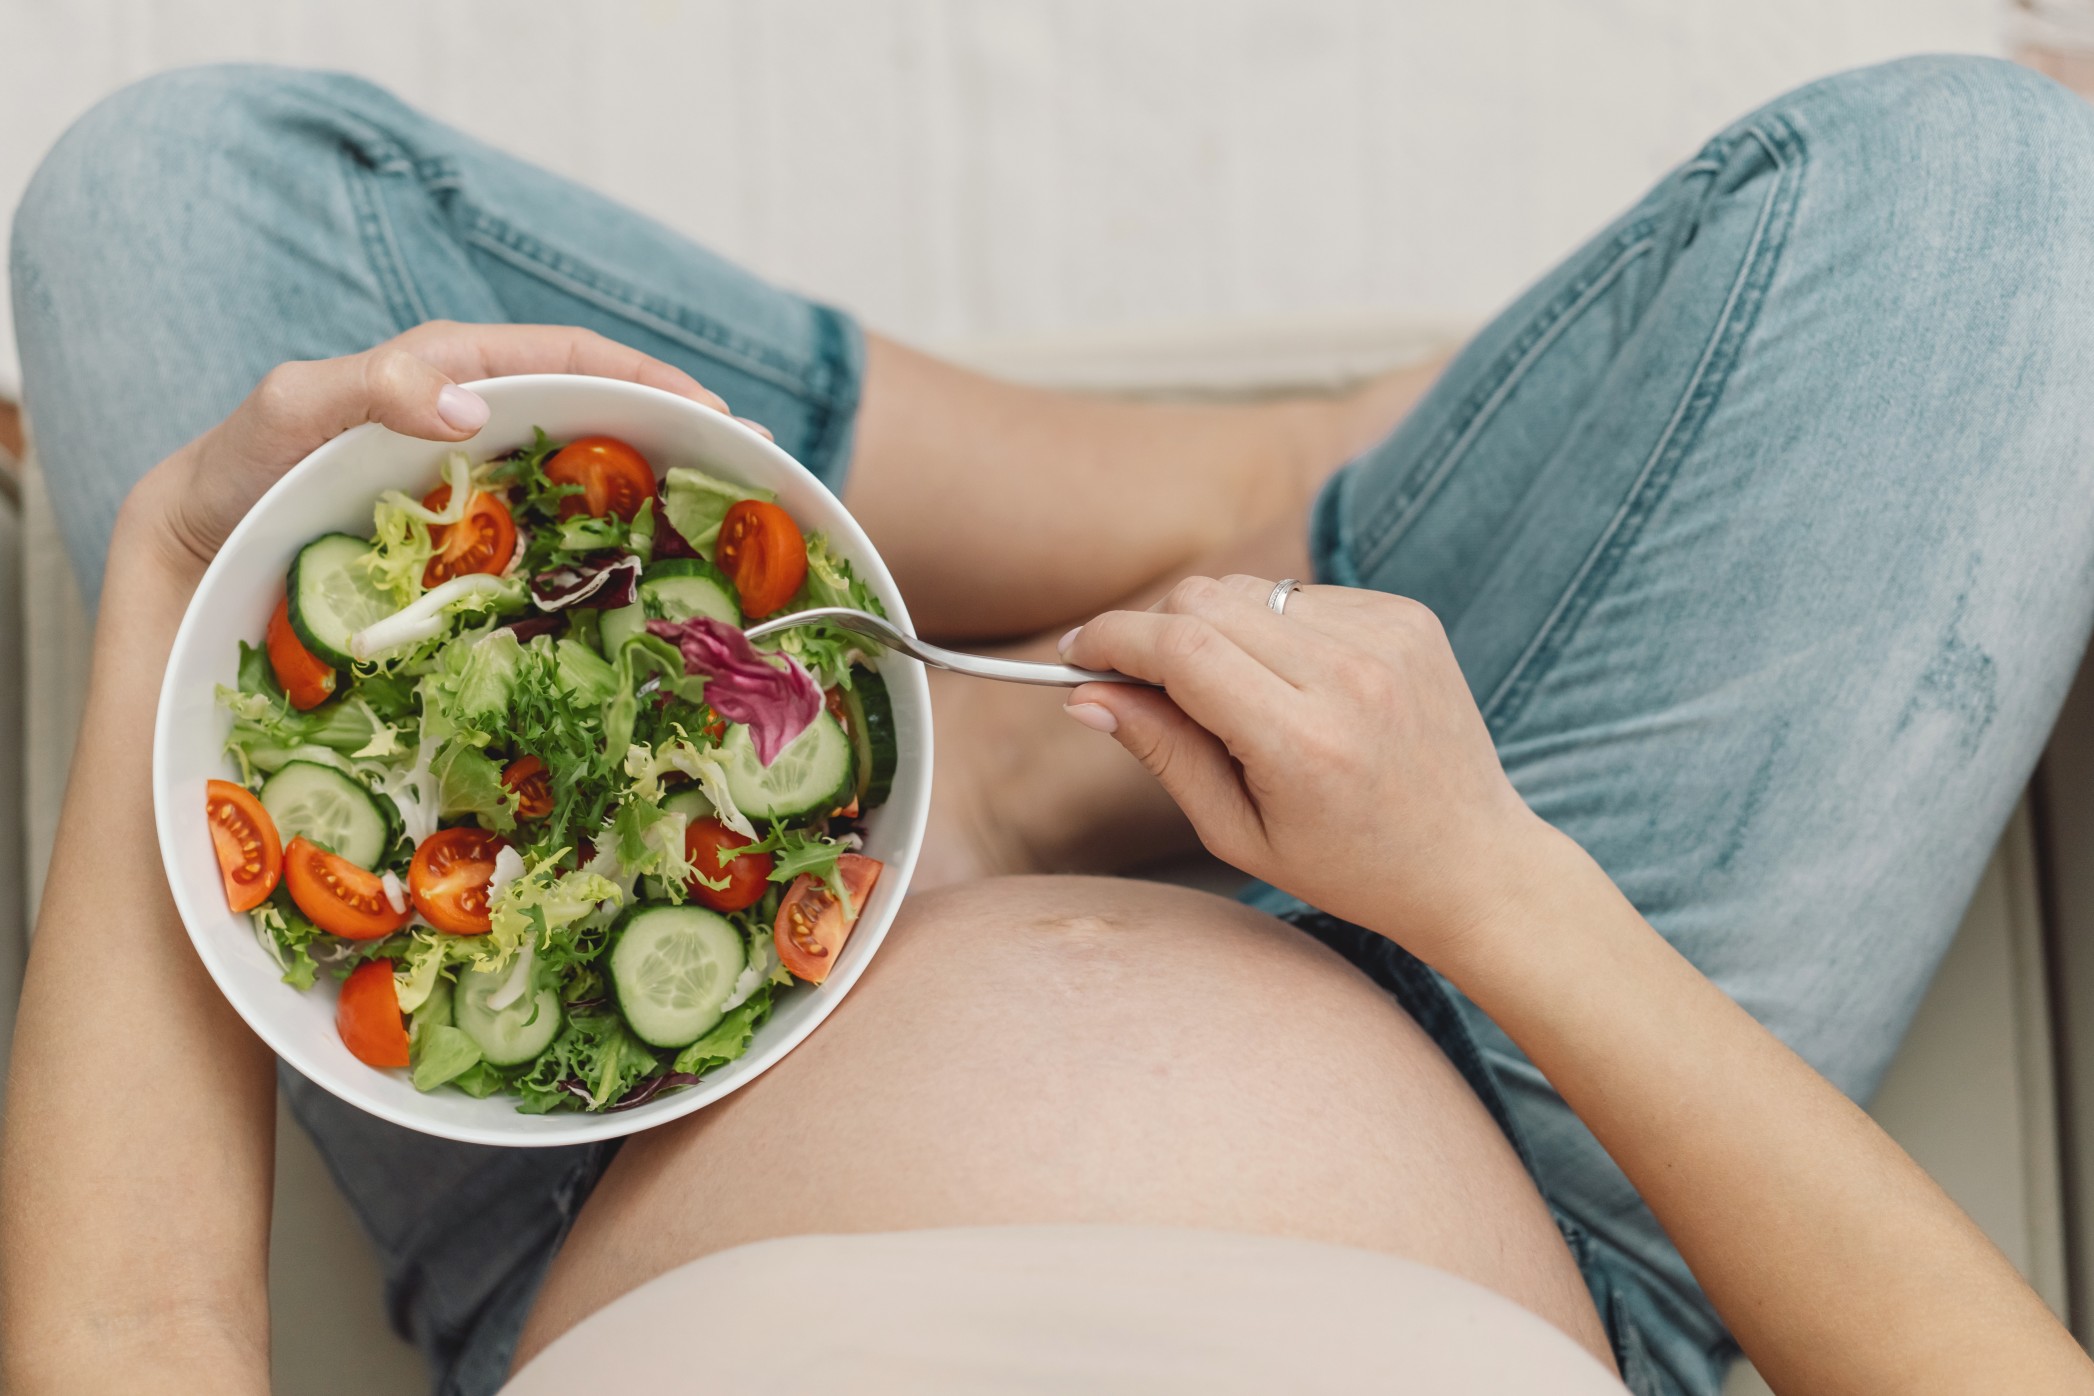 eating healthy when pregnant